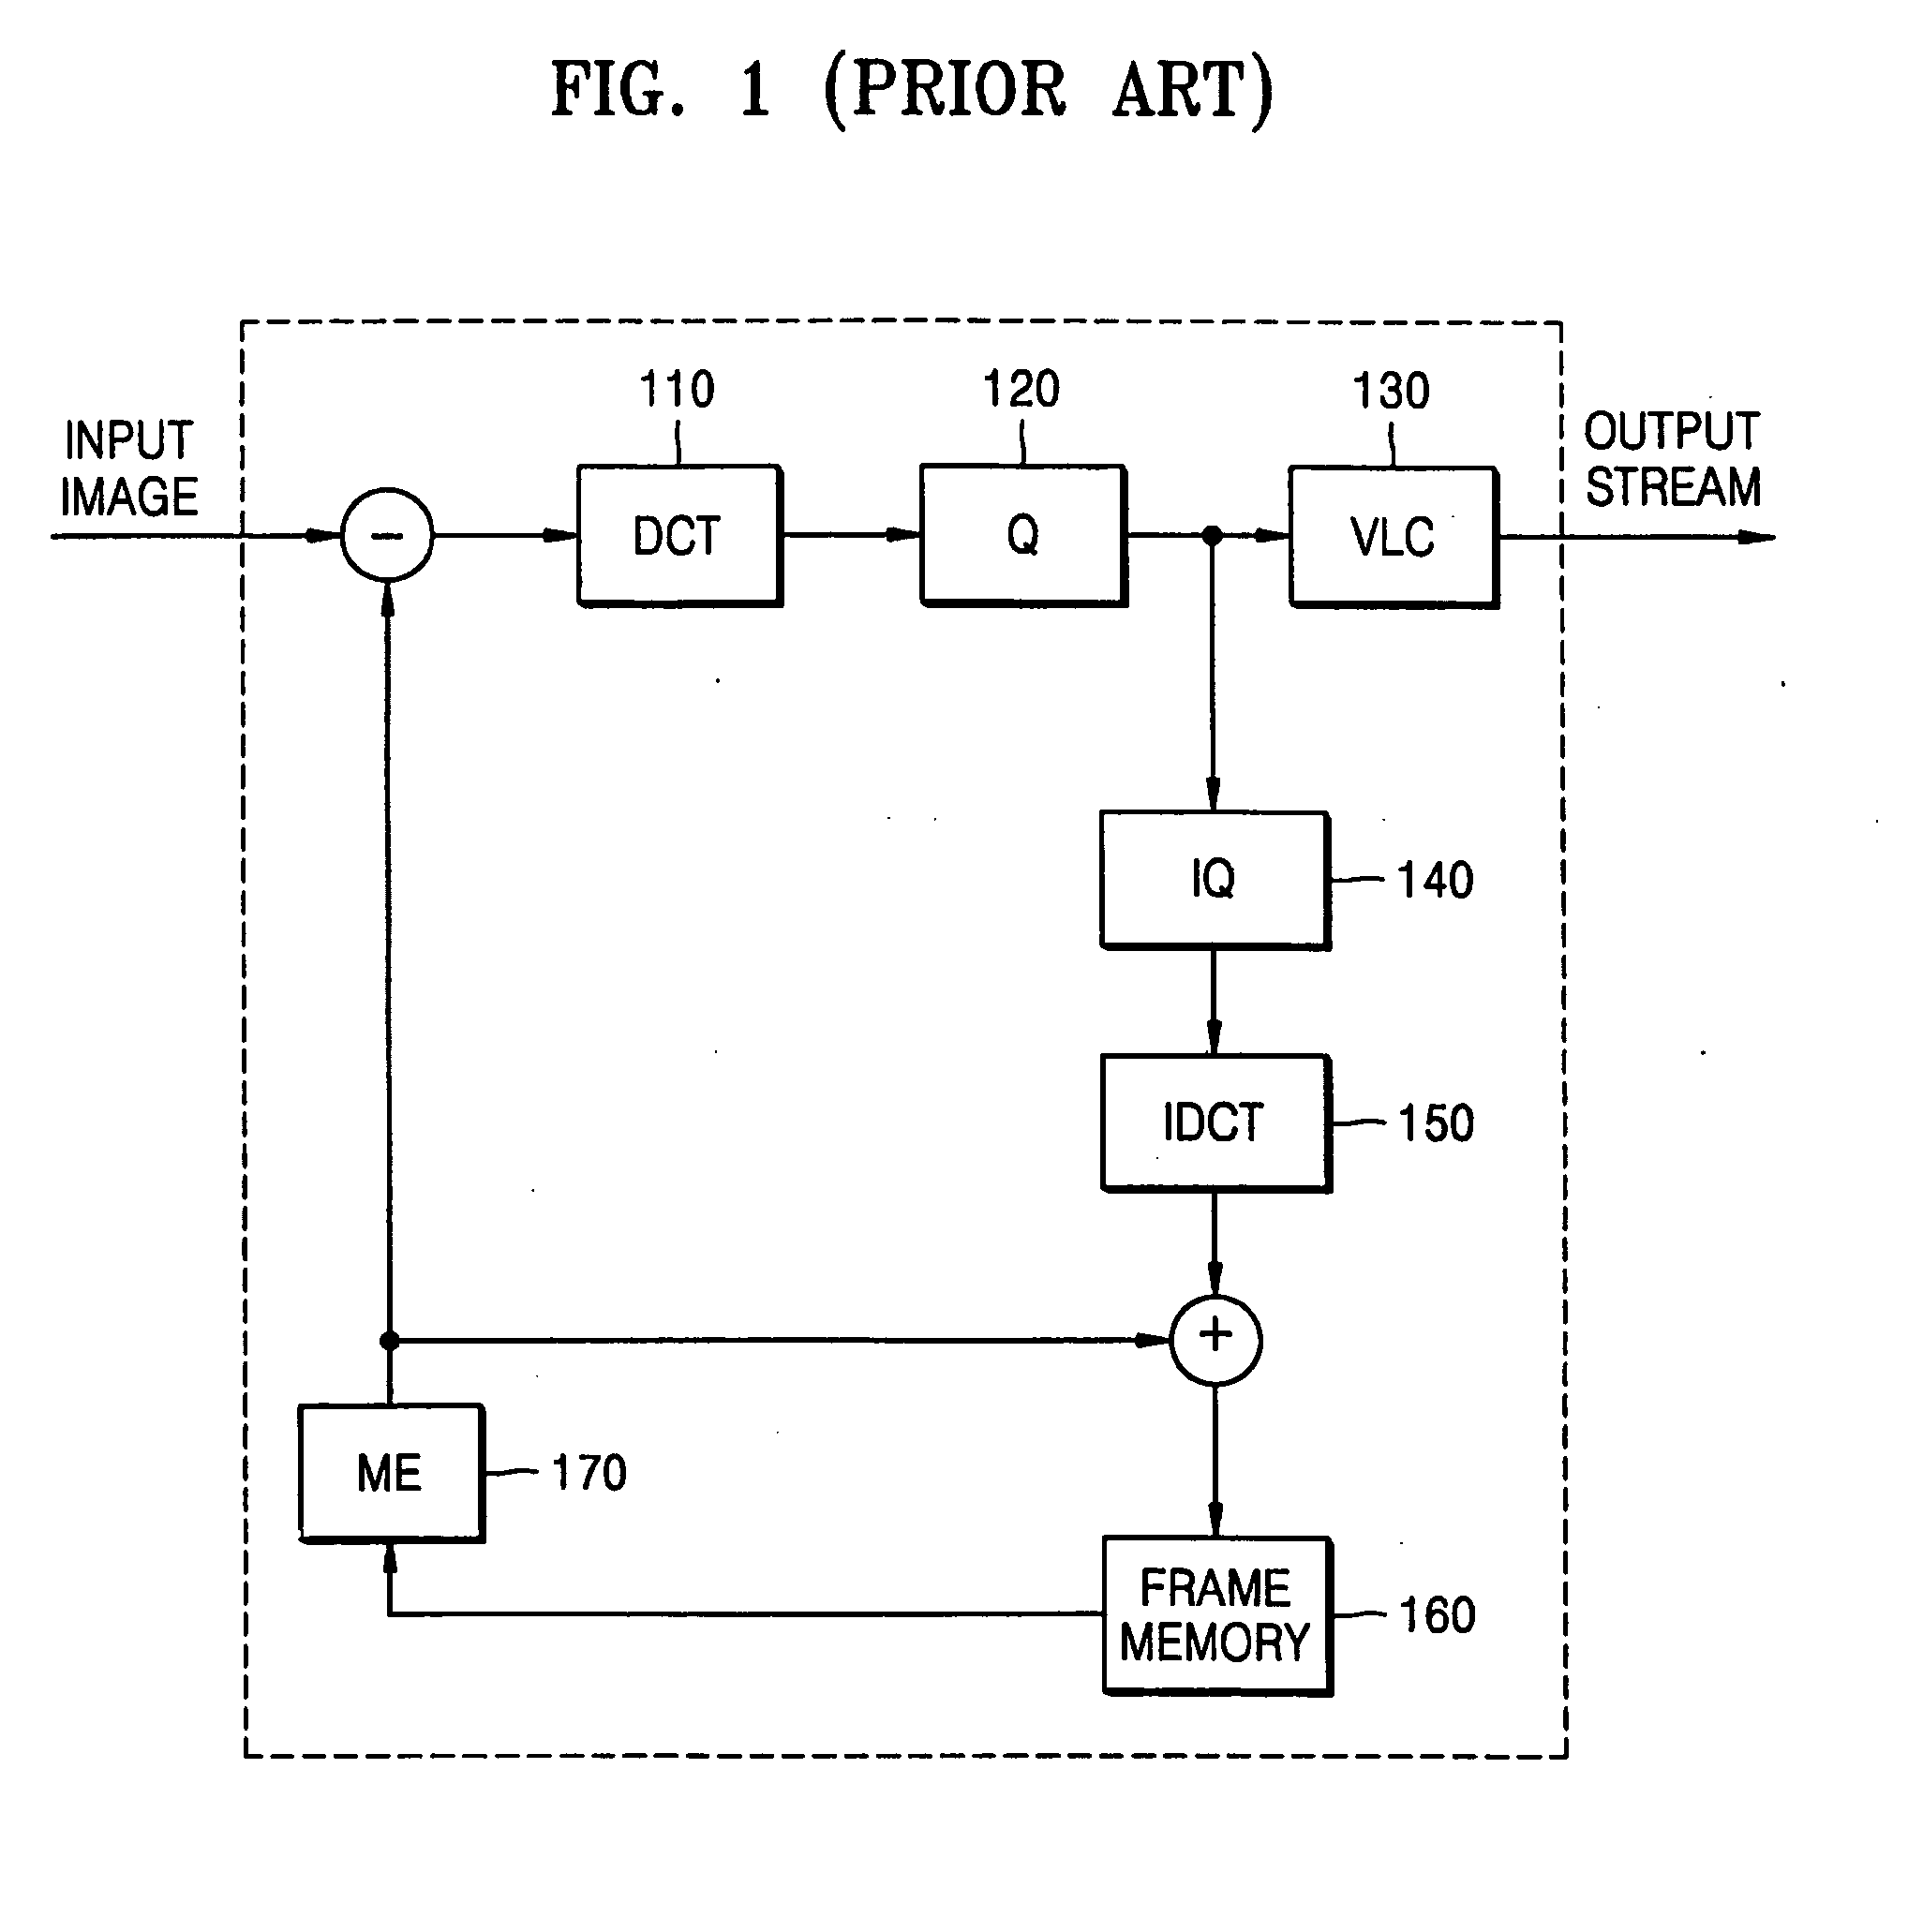 Apparatus for calculating absolute difference value, and motion estimation apparatus and motion picture encoding apparatus which use the apparatus for calculating the absolute difference value